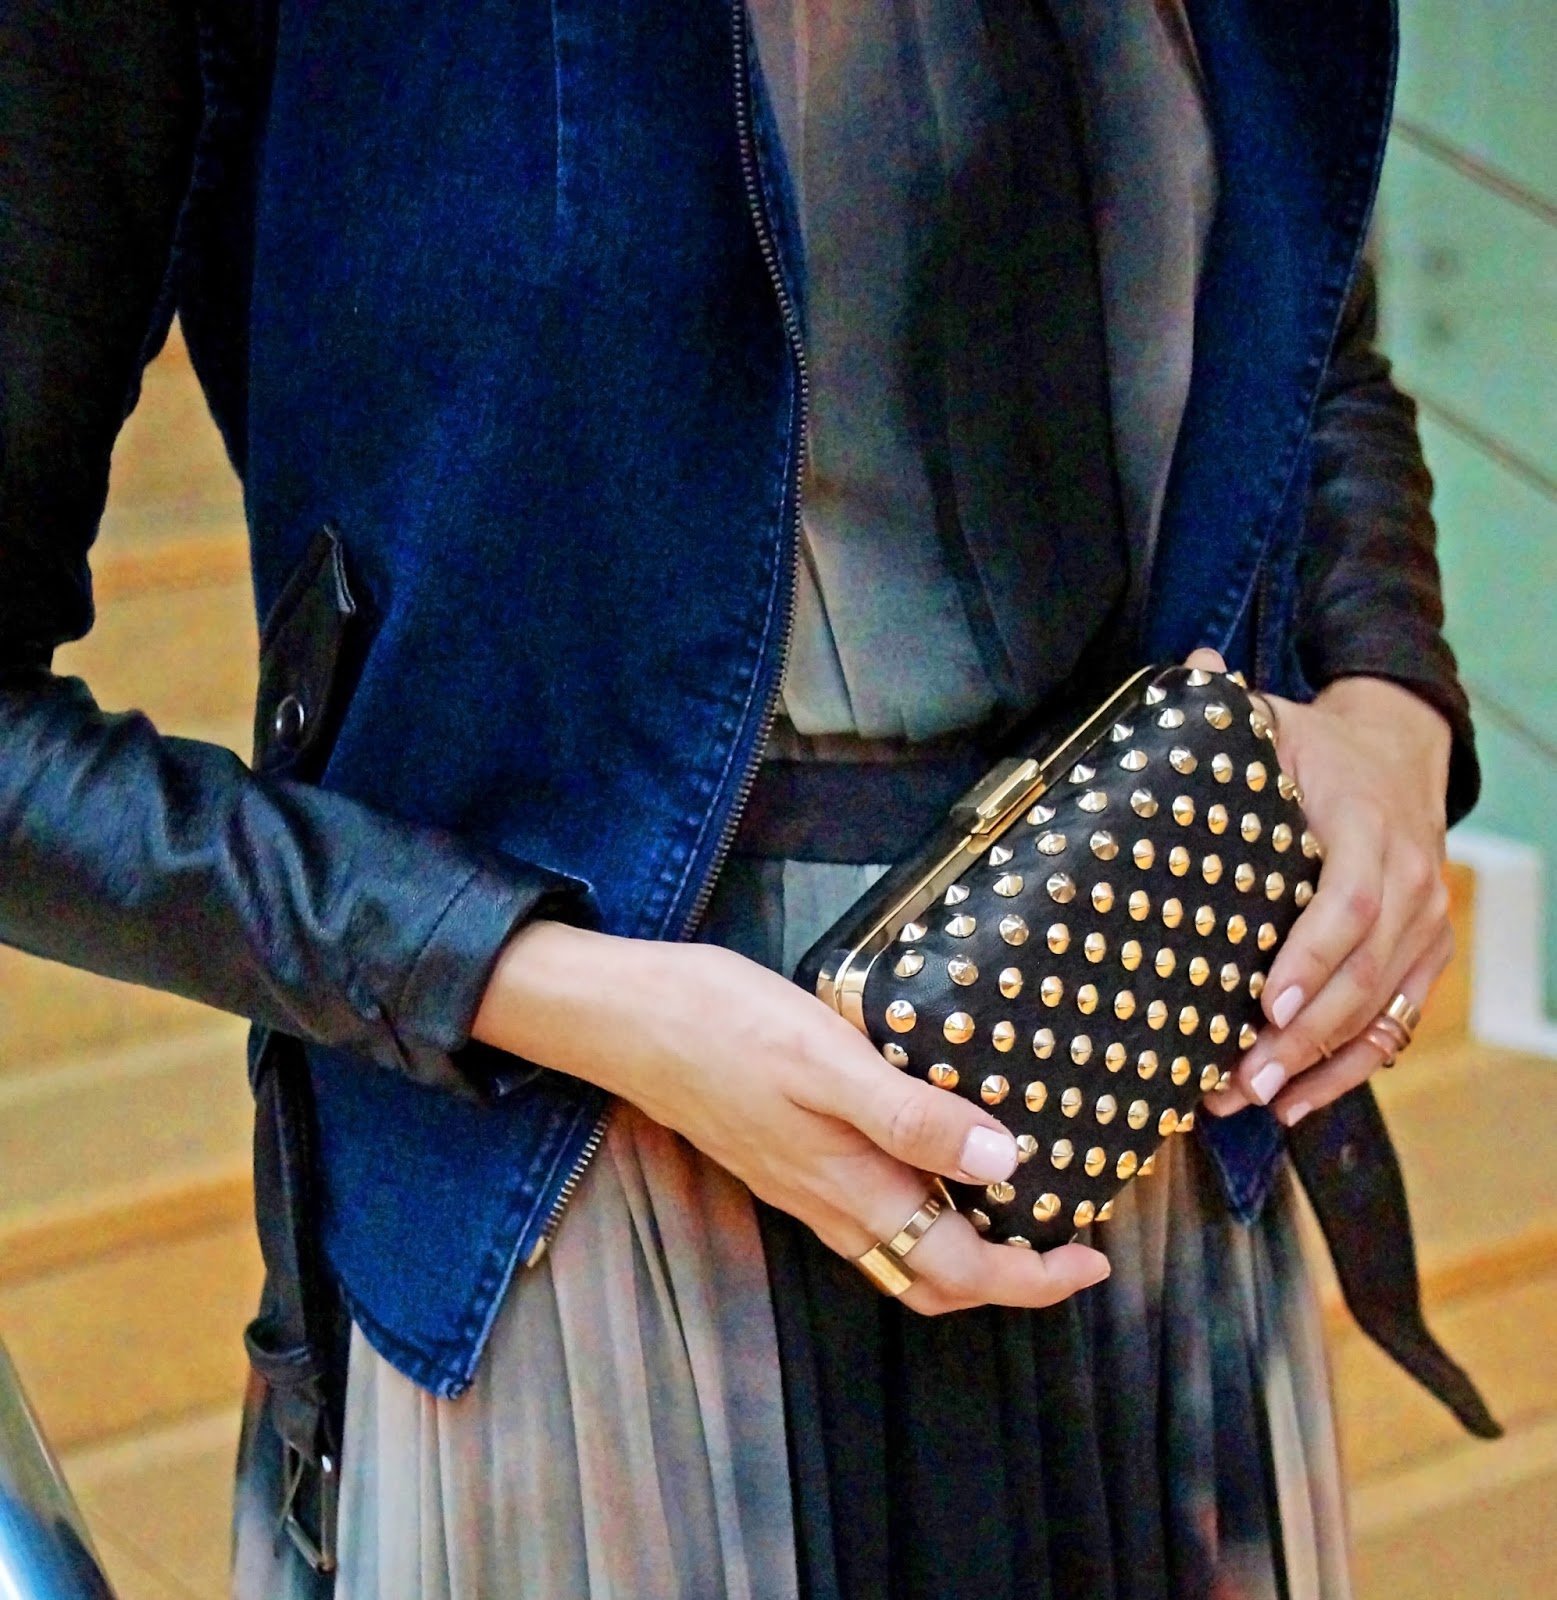 Studded clutch from Forever21